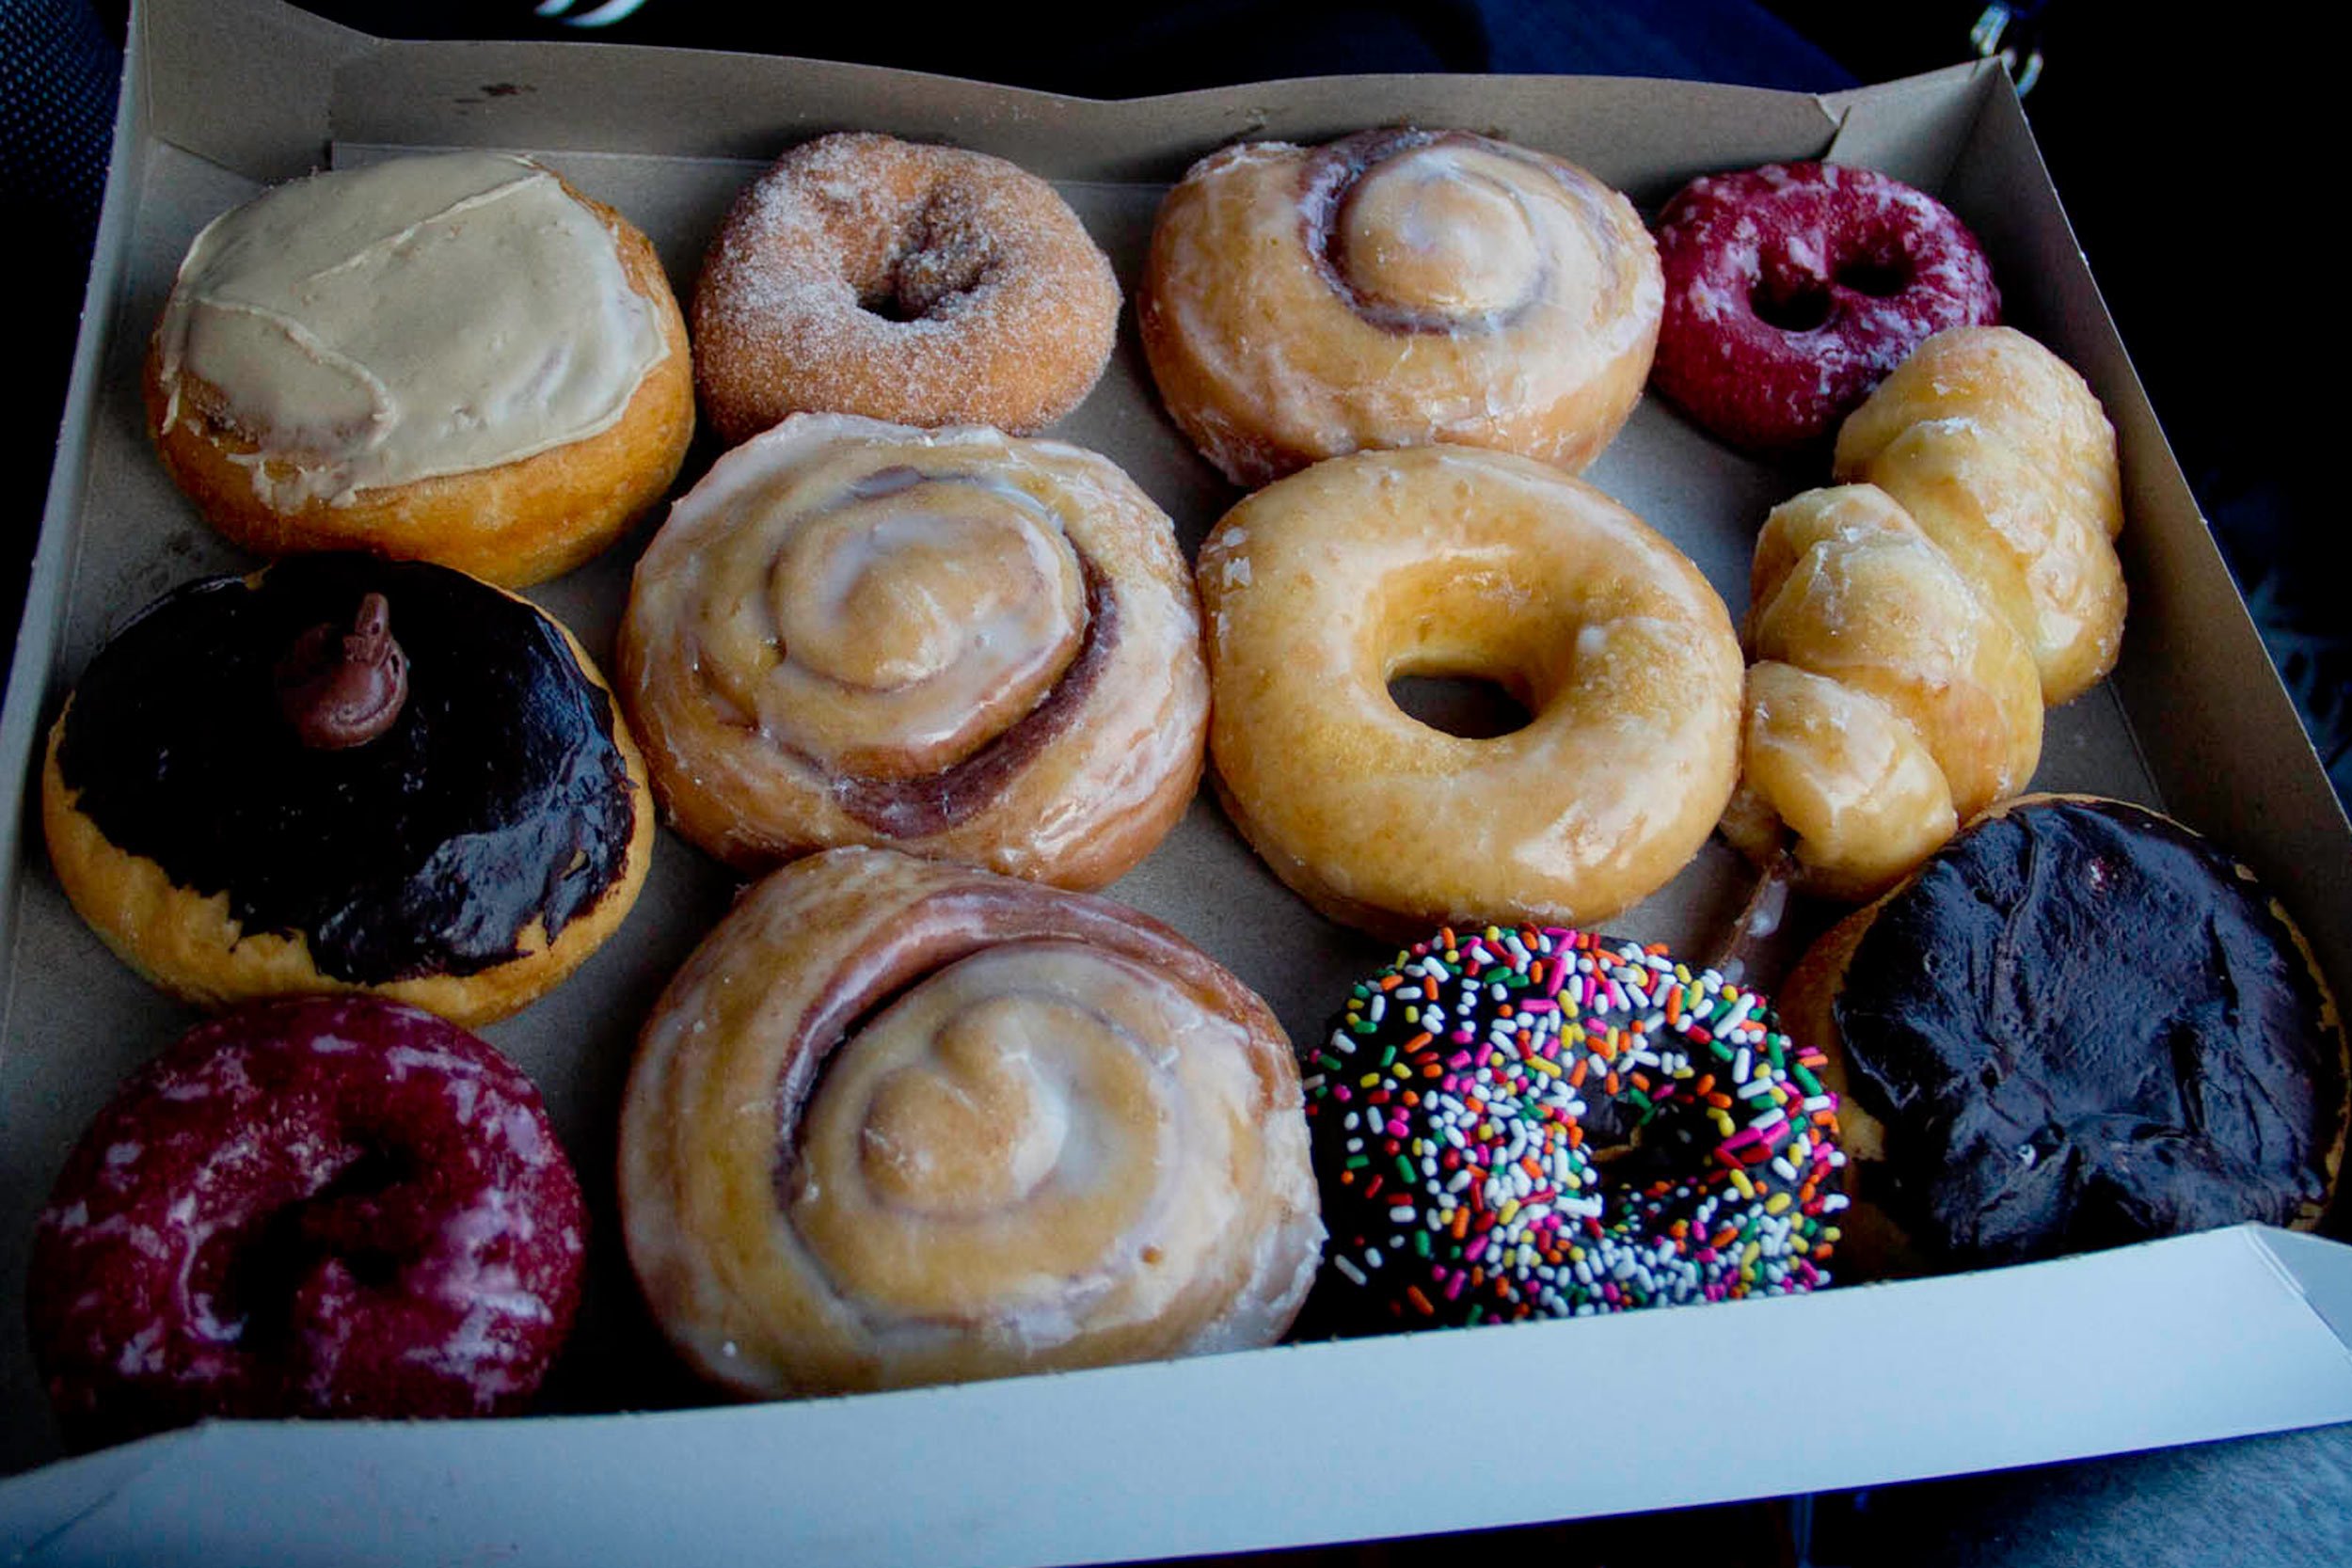 a-dozen-donuts-from-dans-variety-bakery